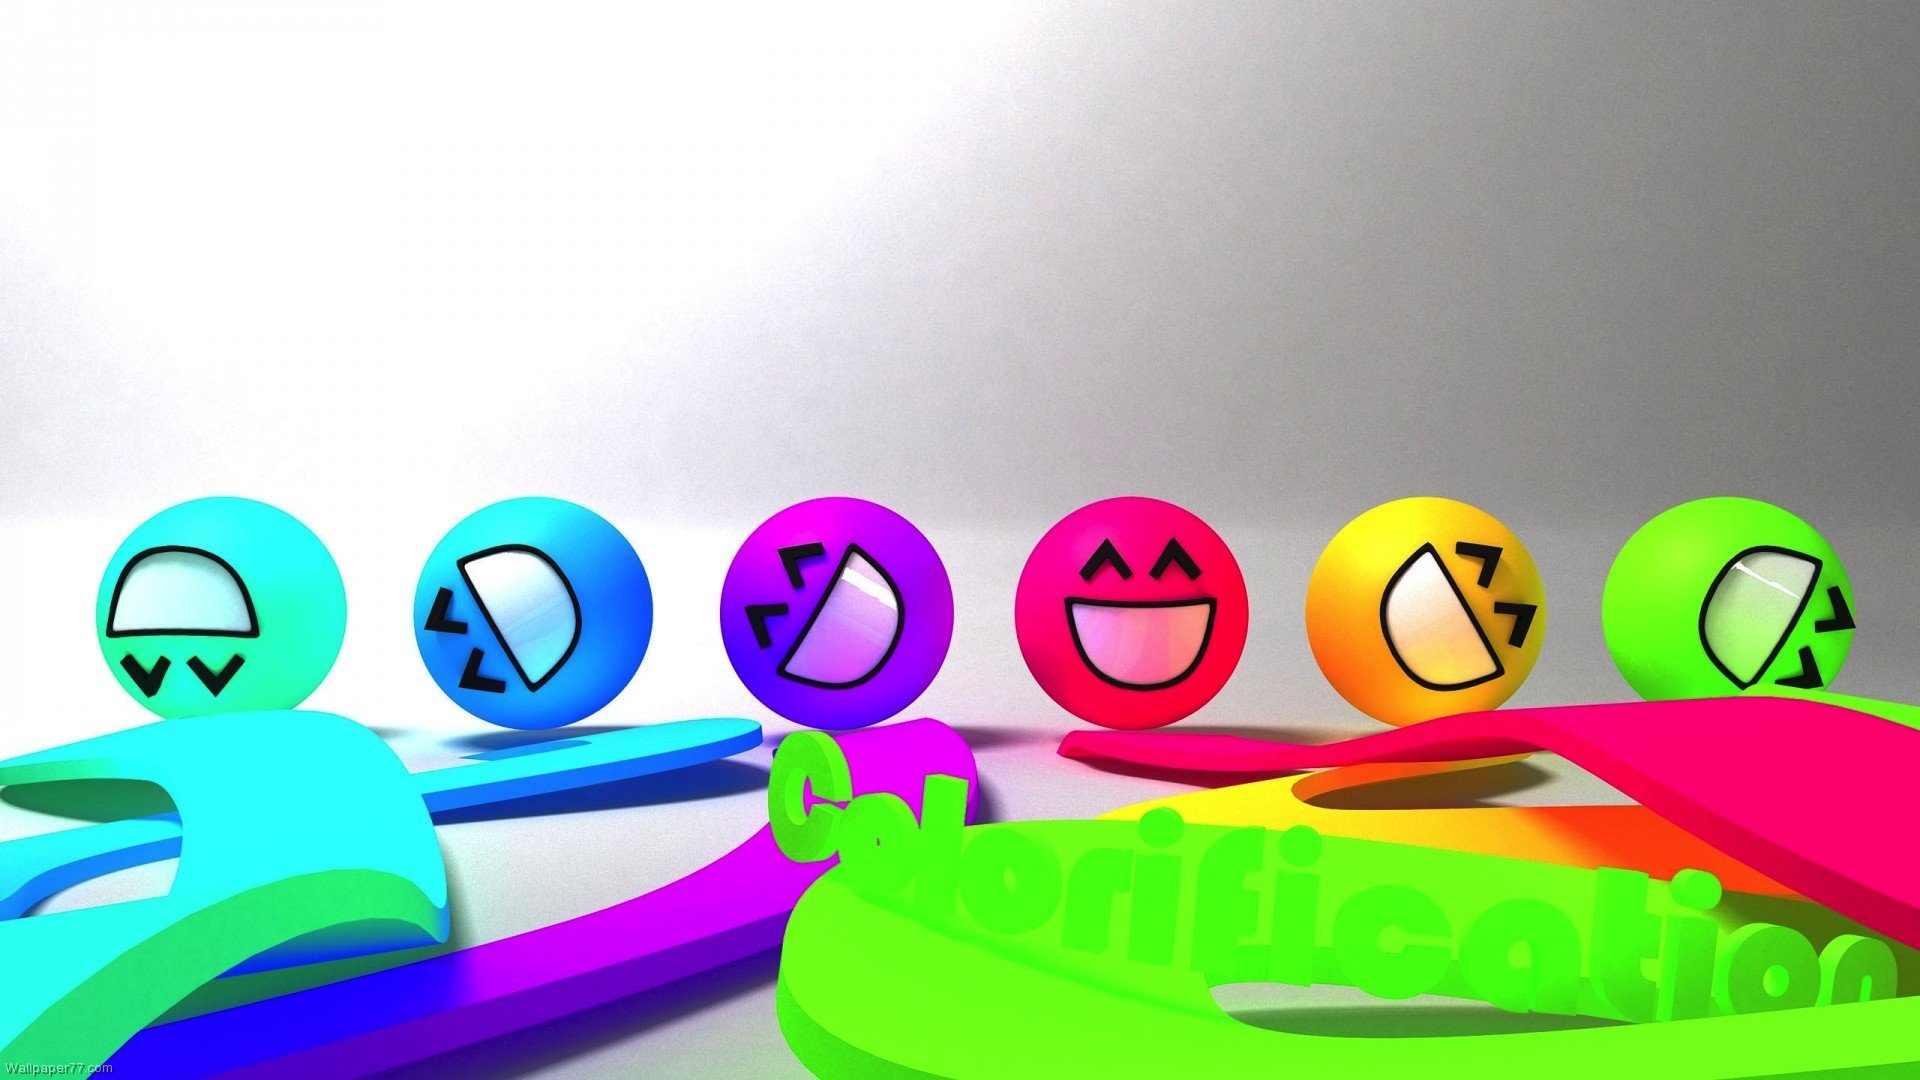 Colorful Smiley Faces 1920x1080 pixels Wallpapers